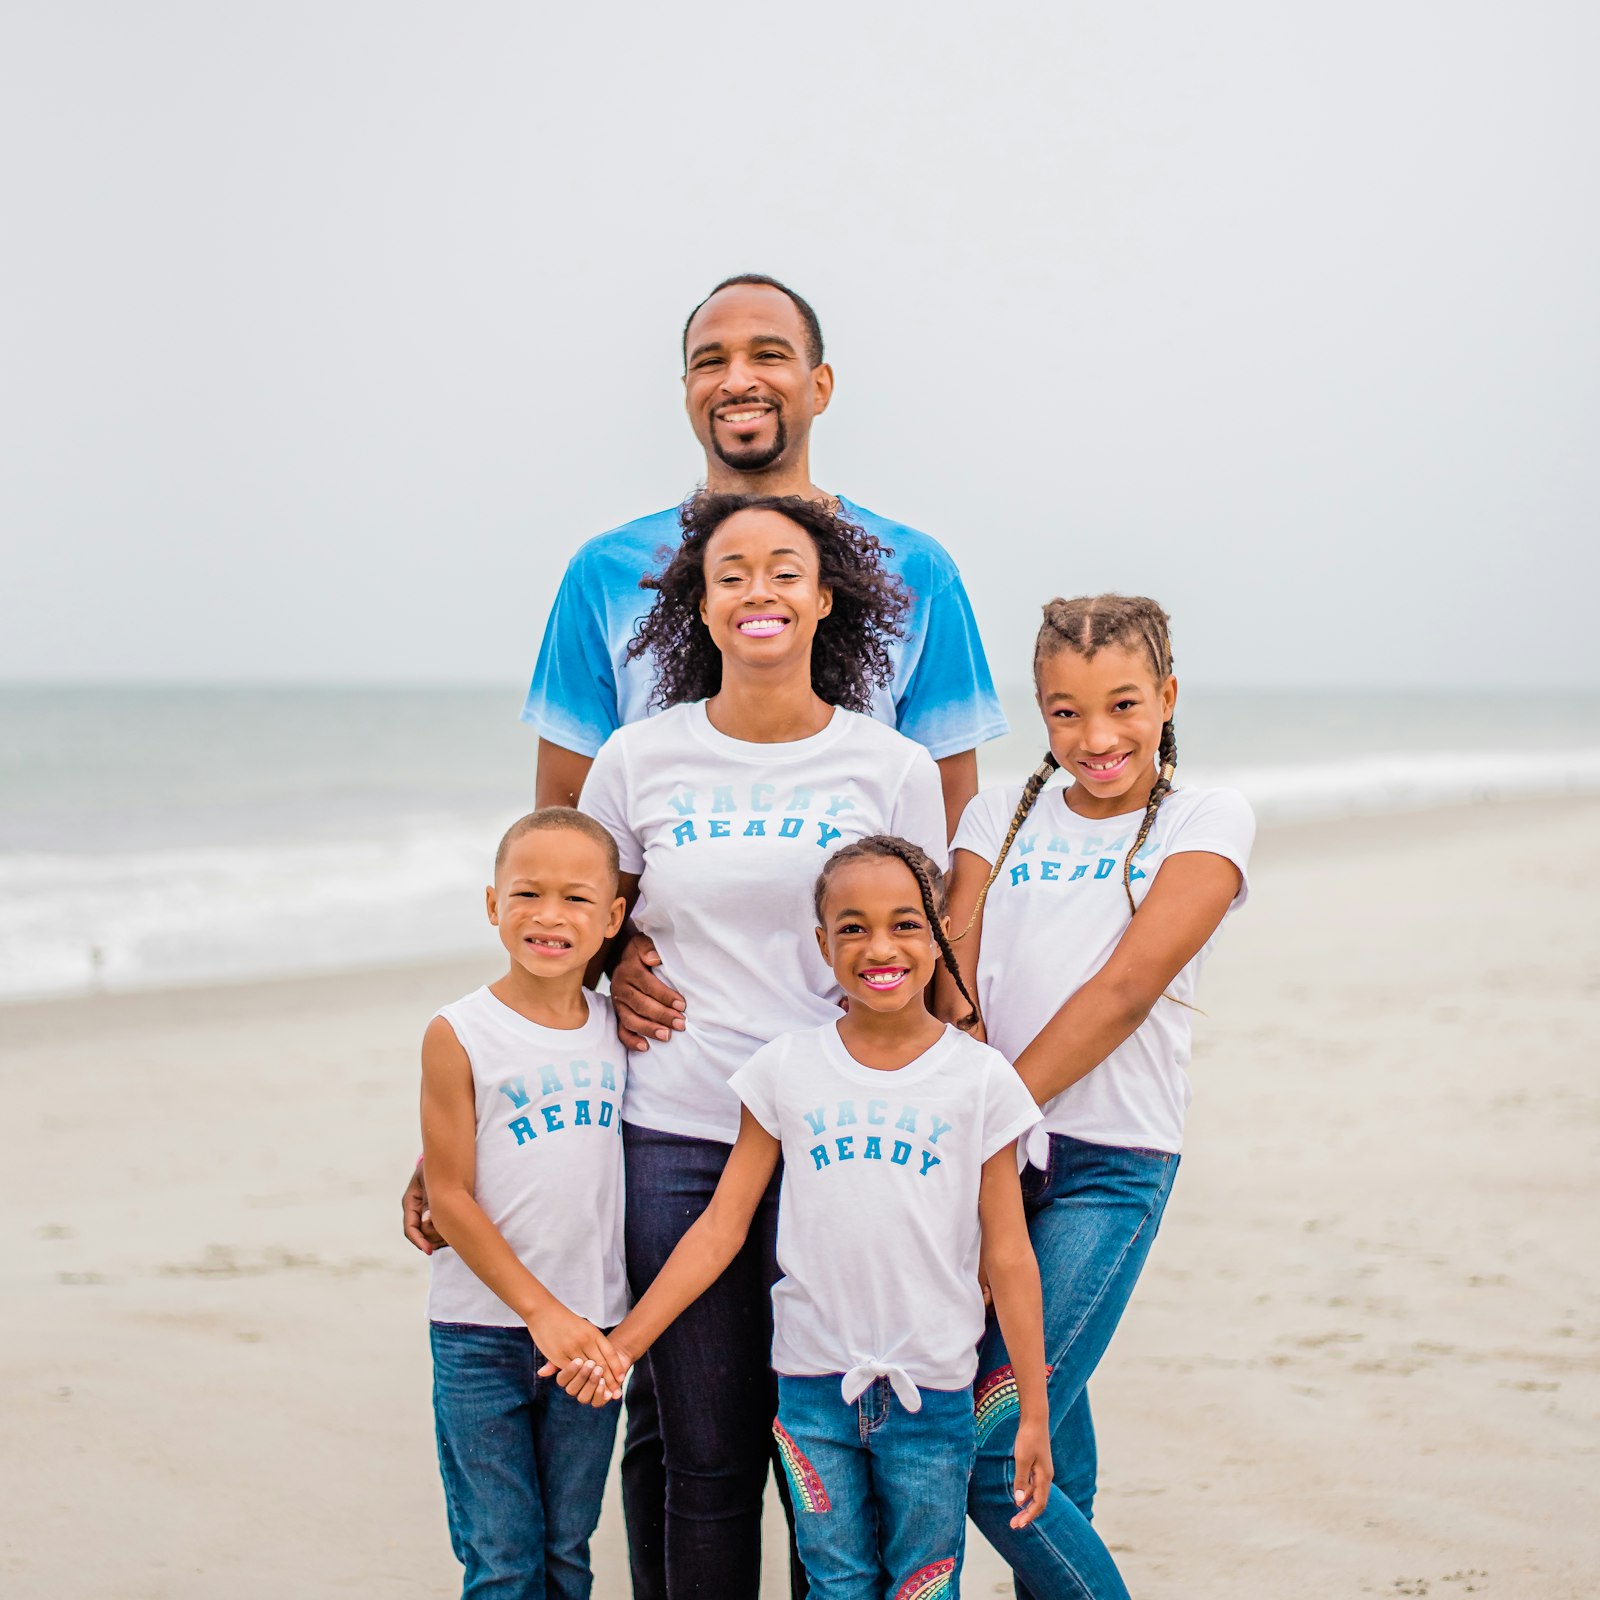 This year's Project Hope recipient, Valerie Albright, center, is pictured with her husband, De'Korey Albright, and children Anna, 11, and twins Lilla and Josiah, 7. Albright, who is battling metastatic cancer, said the support of the St. Clare community has meant the world during her time of trial. "I have never met a more dedicated community," she said. "It's love, and it's rare, and it's free, and it's consistent." (Photo courtesy of the Albright family)